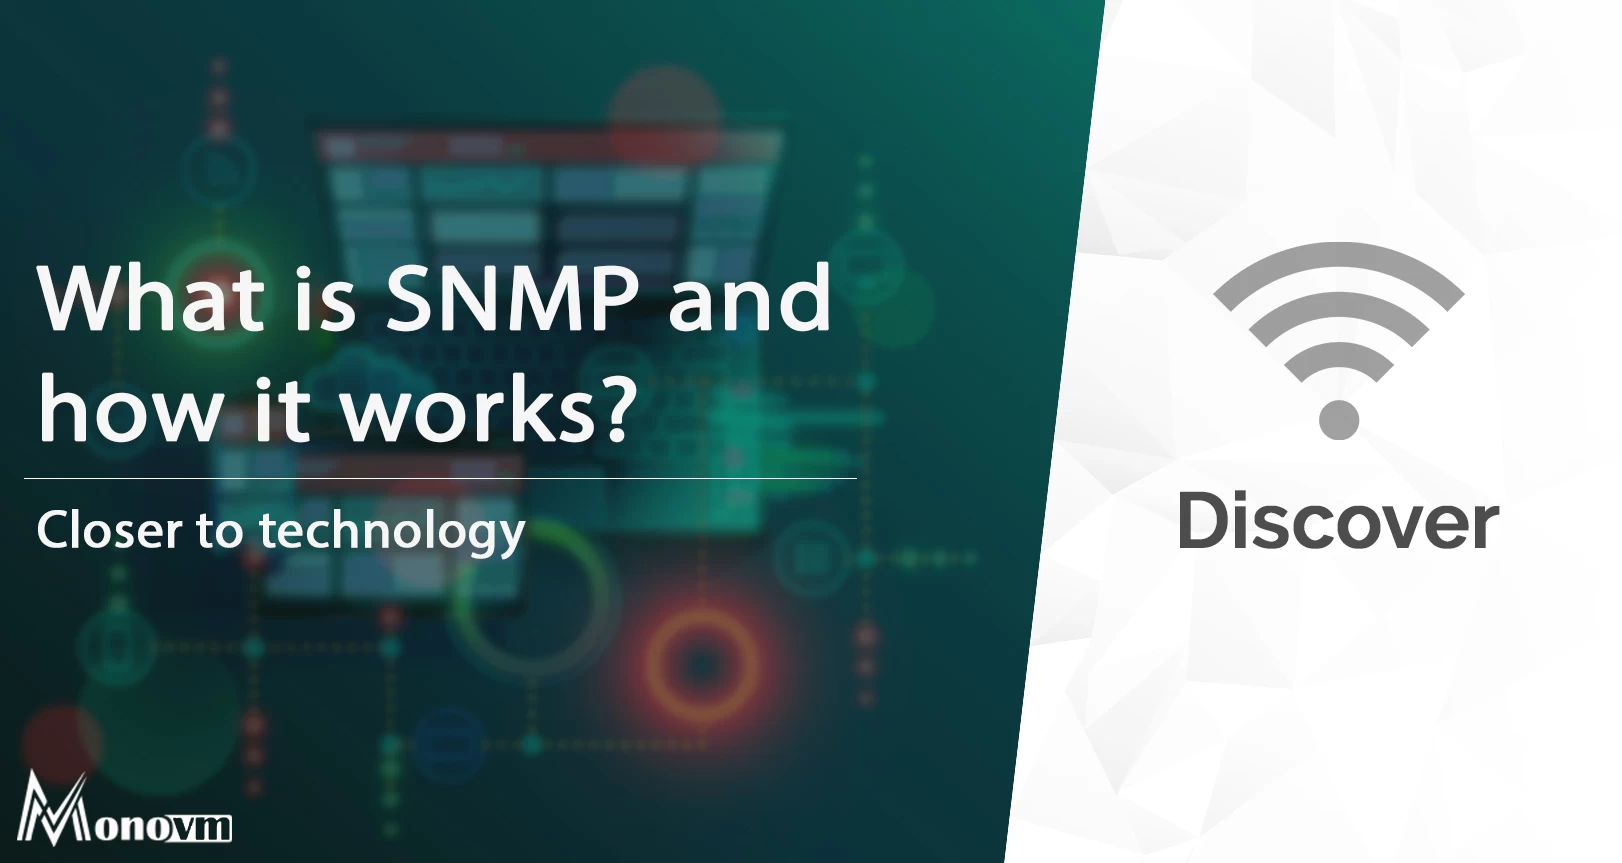 What is SNMP port and how does it work?